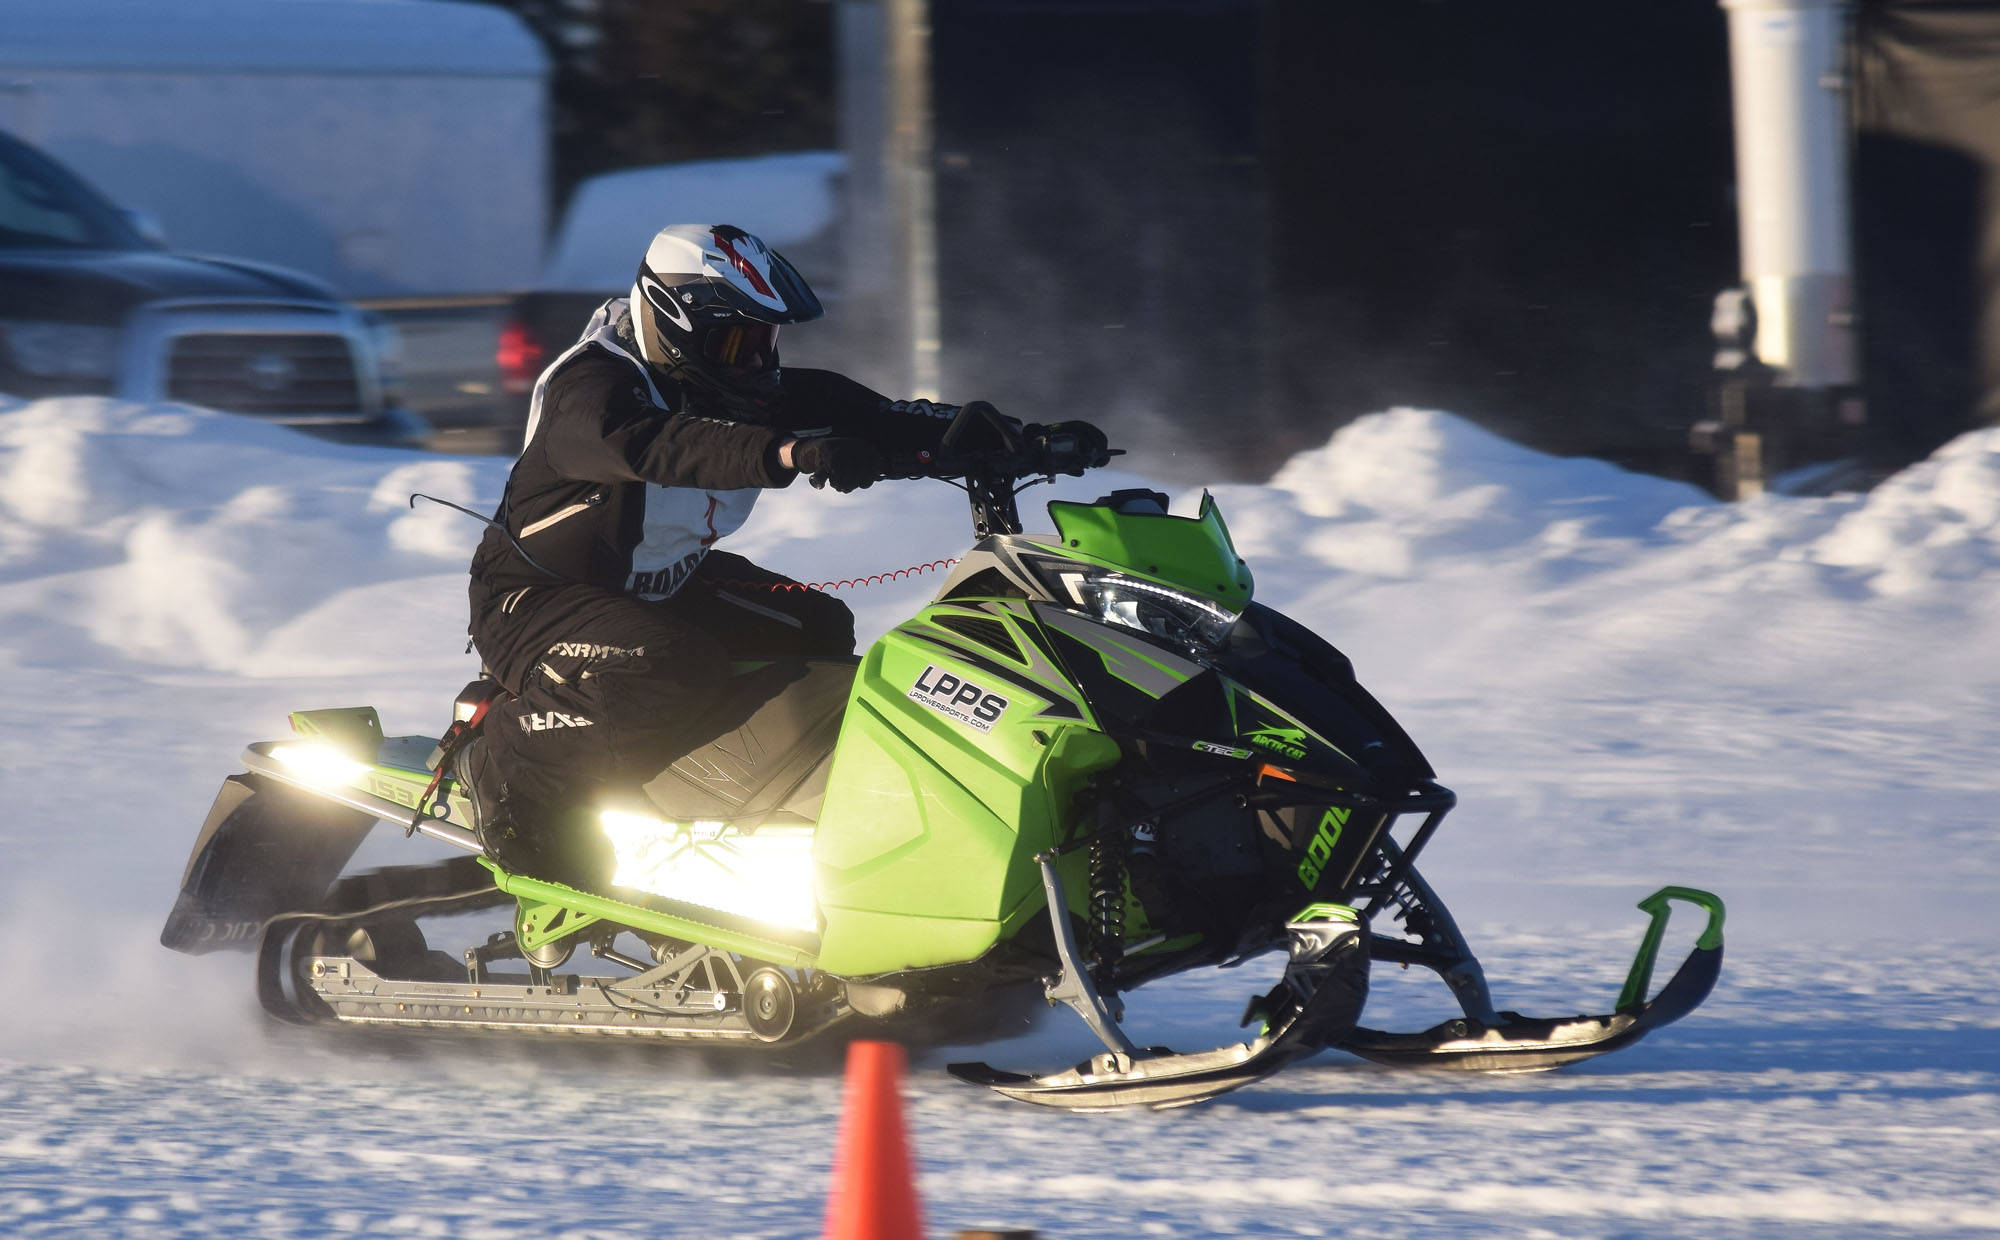 Richard Derkevorkian makes a pass in a heat race Saturday afternoon at the snowmachine drag races at Freddie’s Roadhouse near Ninilchik. (Photo by Joey Klecka/Peninsula Clarion)